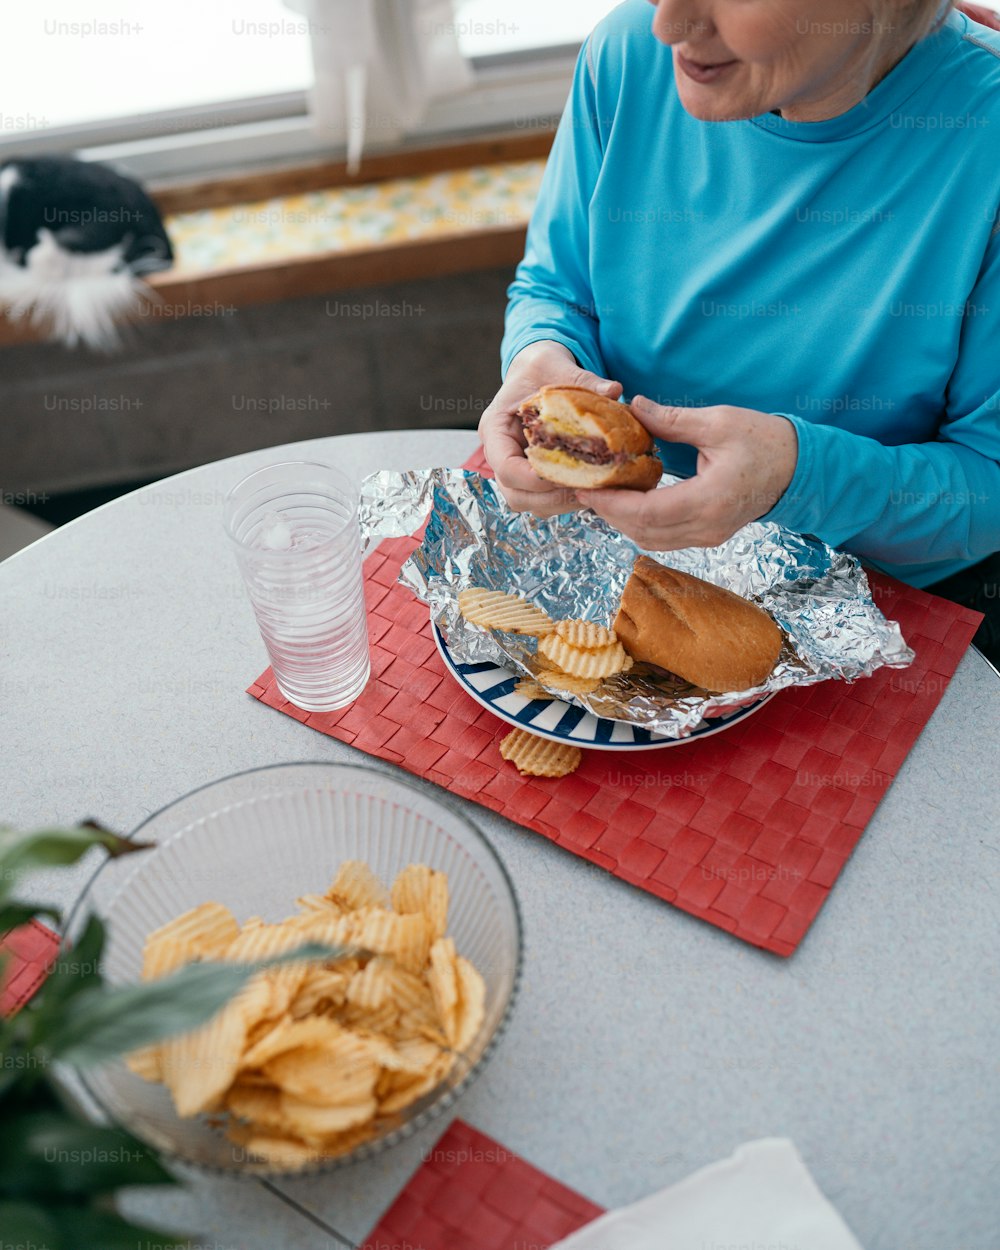 a woman sitting at a table eating a sandwich and chips